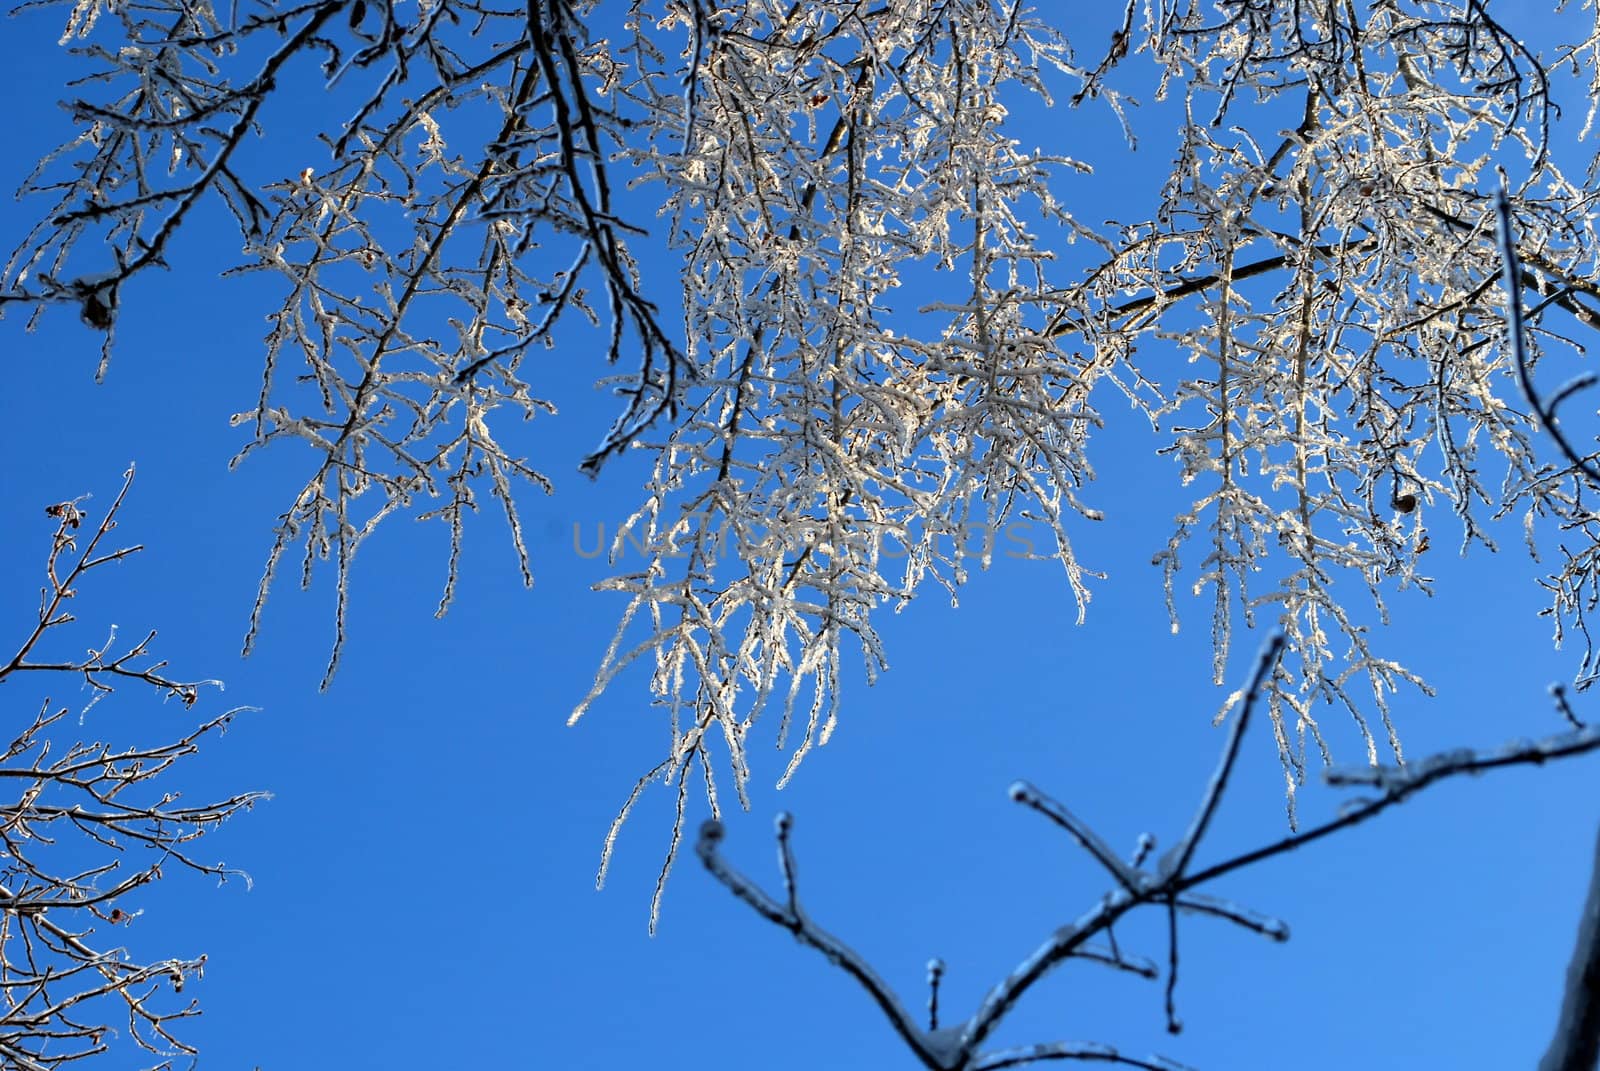 sun sparkled the tree branch in ice on a blue sky background  by svtrotof